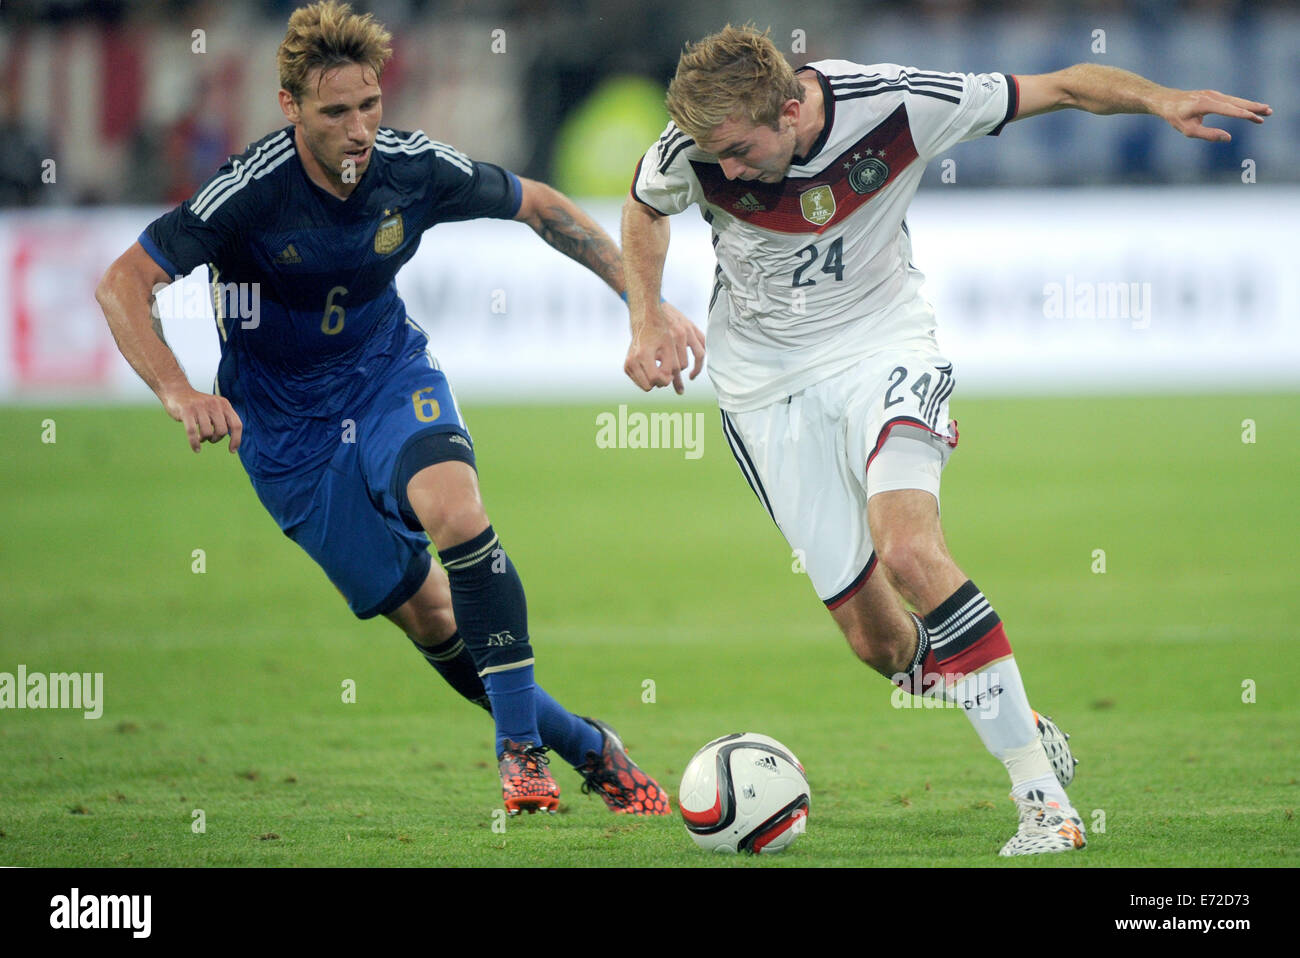 Duesseldorf, Germany. 03rd Sep, 2014. Argentina's Lucas Biglia (L) and Germany's Christoph Kramer vie for the ball during the international match between Germany and Argentina at Esprit Arena in Duesseldorf, Germany, 03 September 2014. Photo: Jonas Guettler/dpa/Alamy Live News Stock Photo